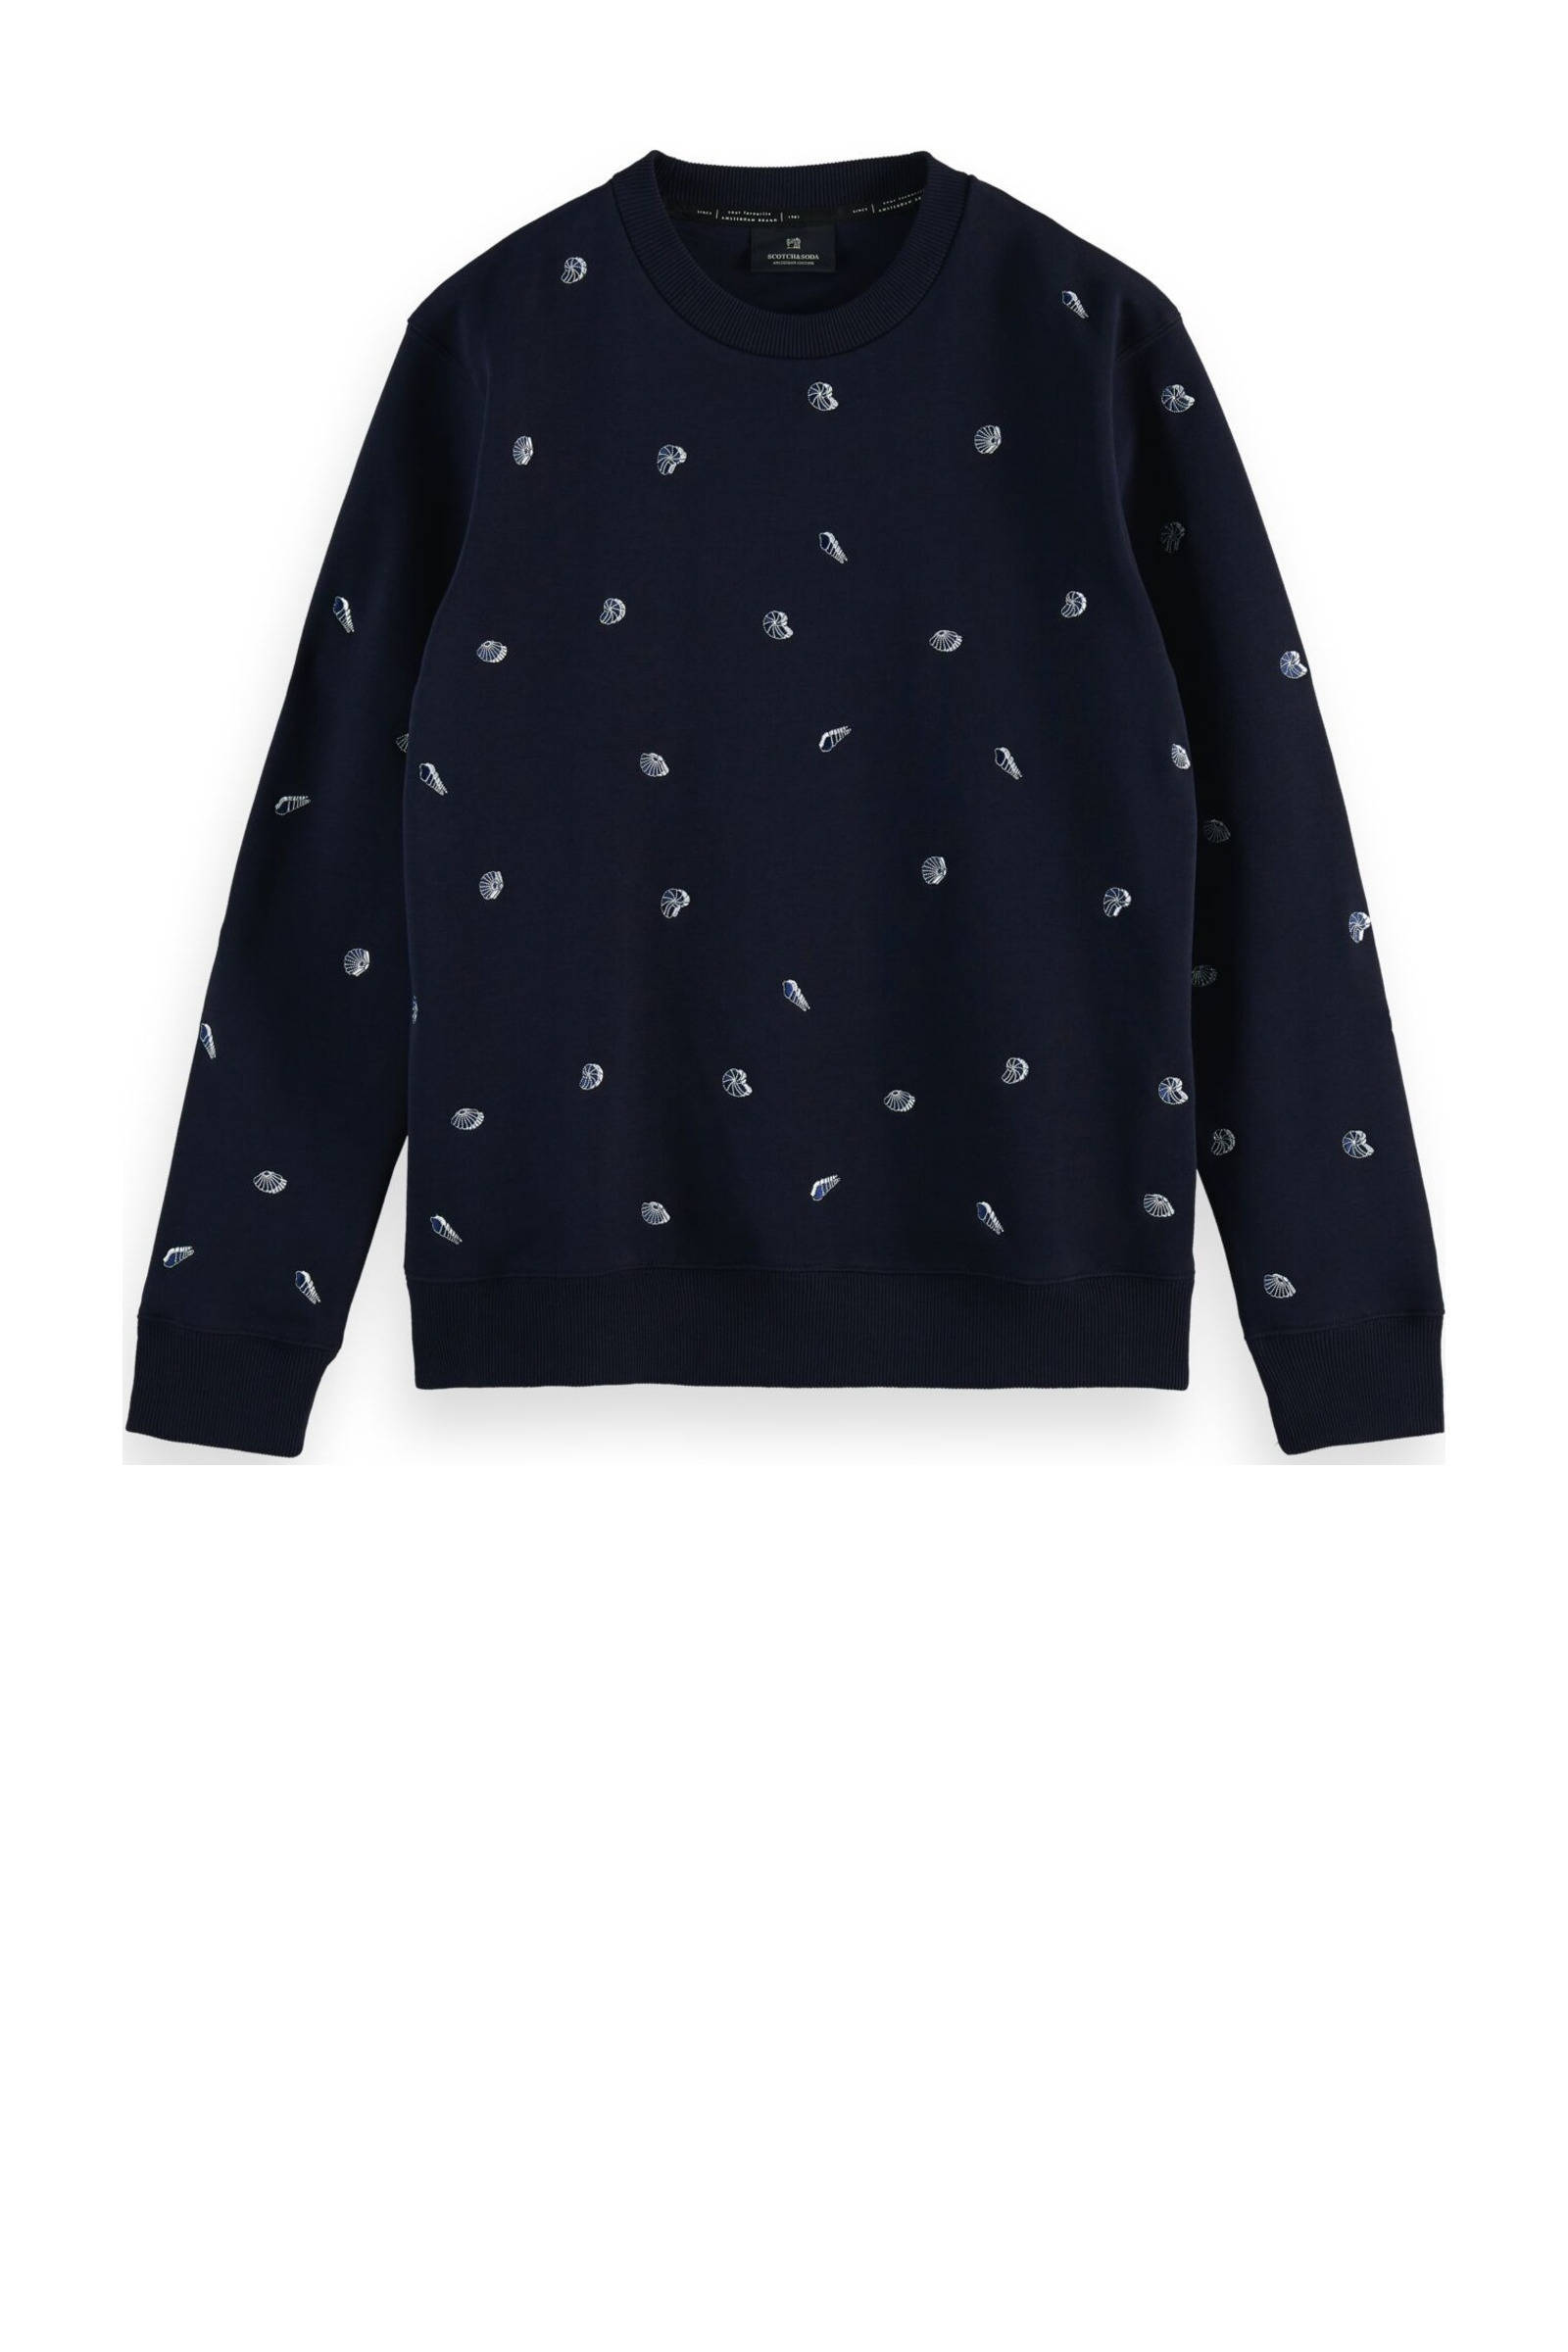 Scotch and Soda Truien All over embroidered crewneck sweat Blauw online kopen